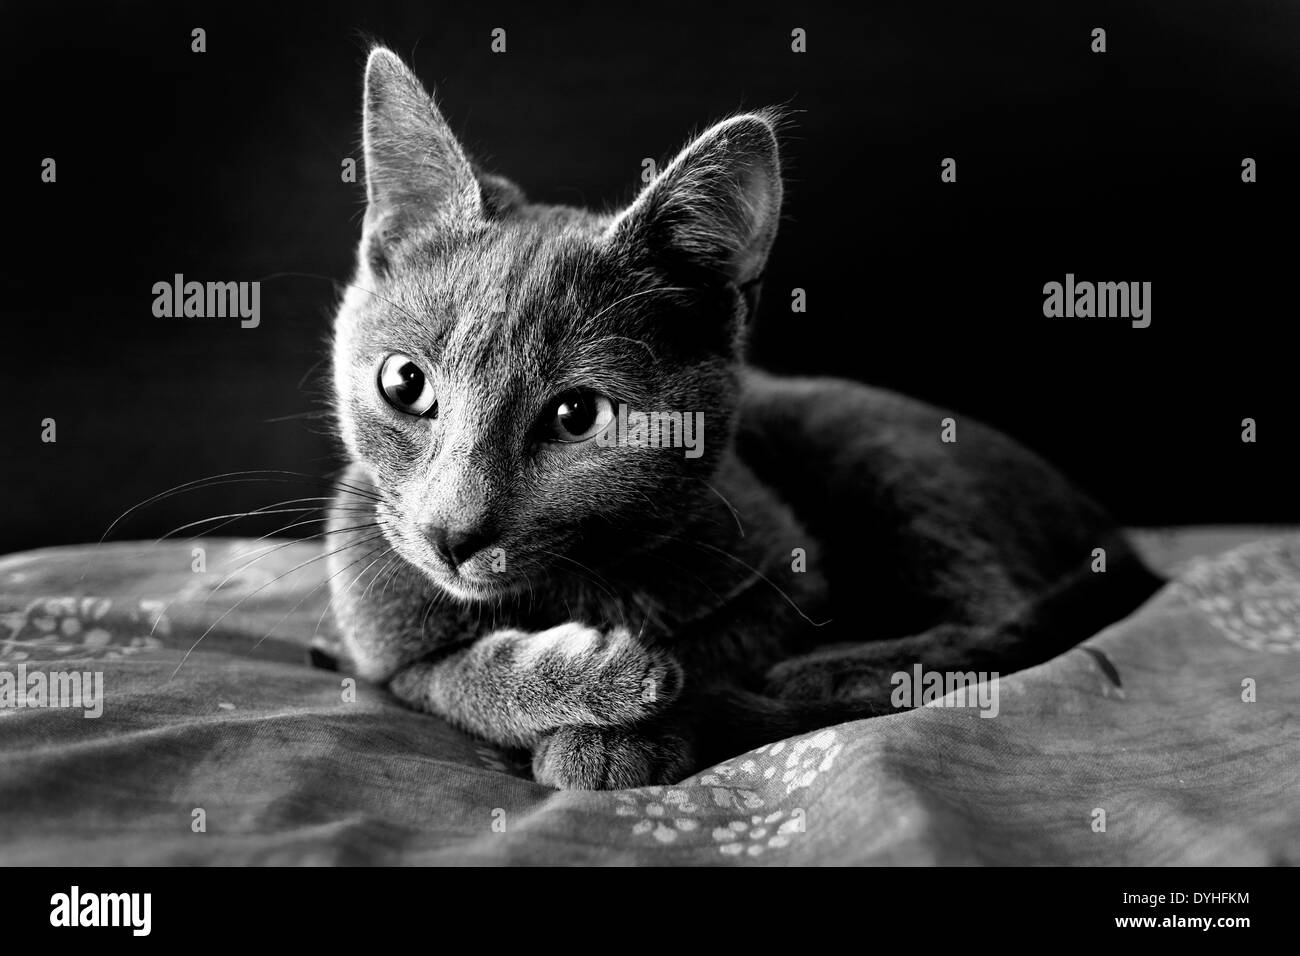 A gray cat lied down on a bed Stock Photo